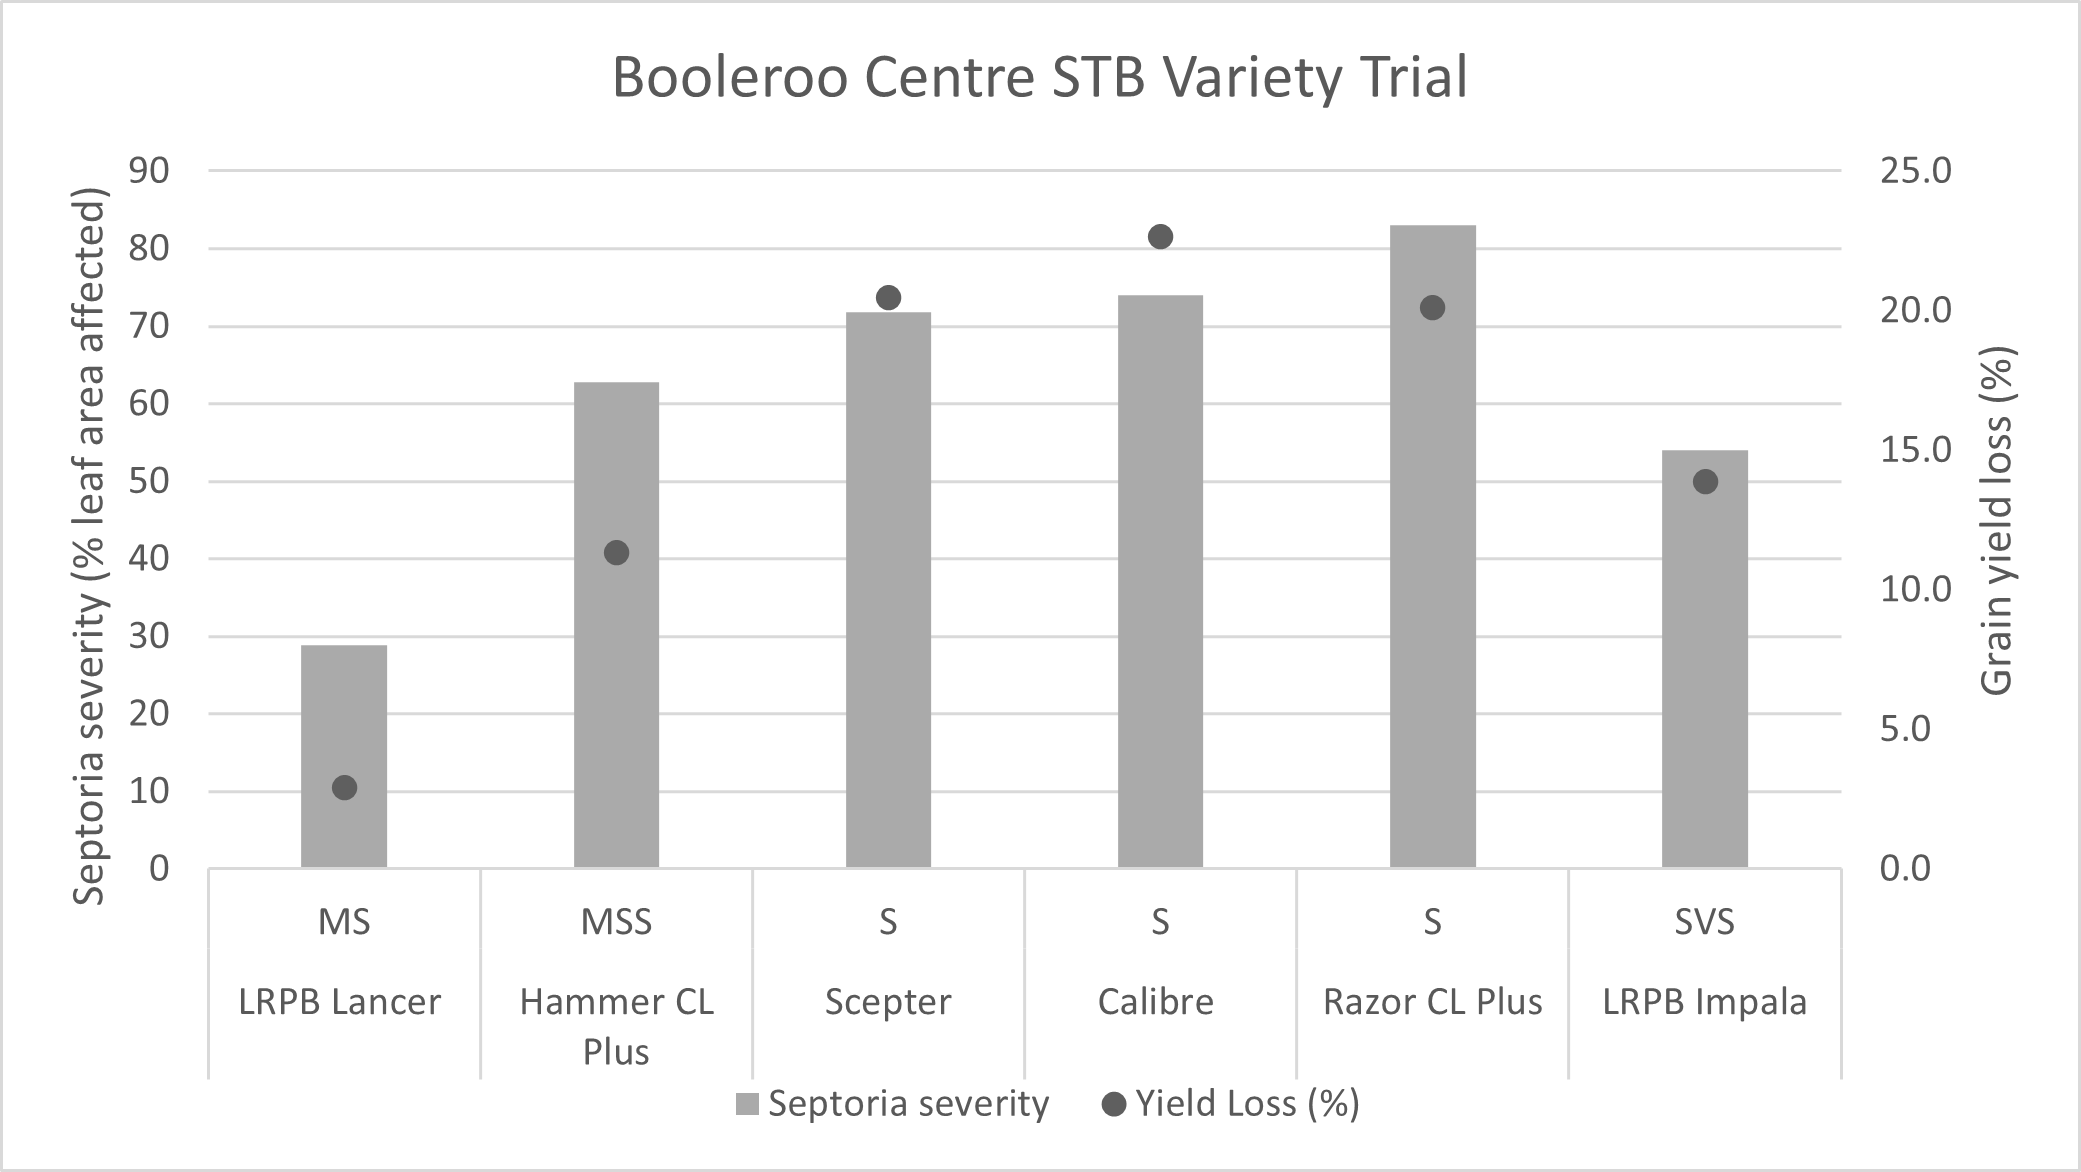 . Grain yield losses and STB disease severity at Booleroo Centre STB variety trial in 2022. Yield losses were significant in Hammer CL PlusA, ScepterA, CalibreA, Razor CL PlusA and LRPB ImpalaA.